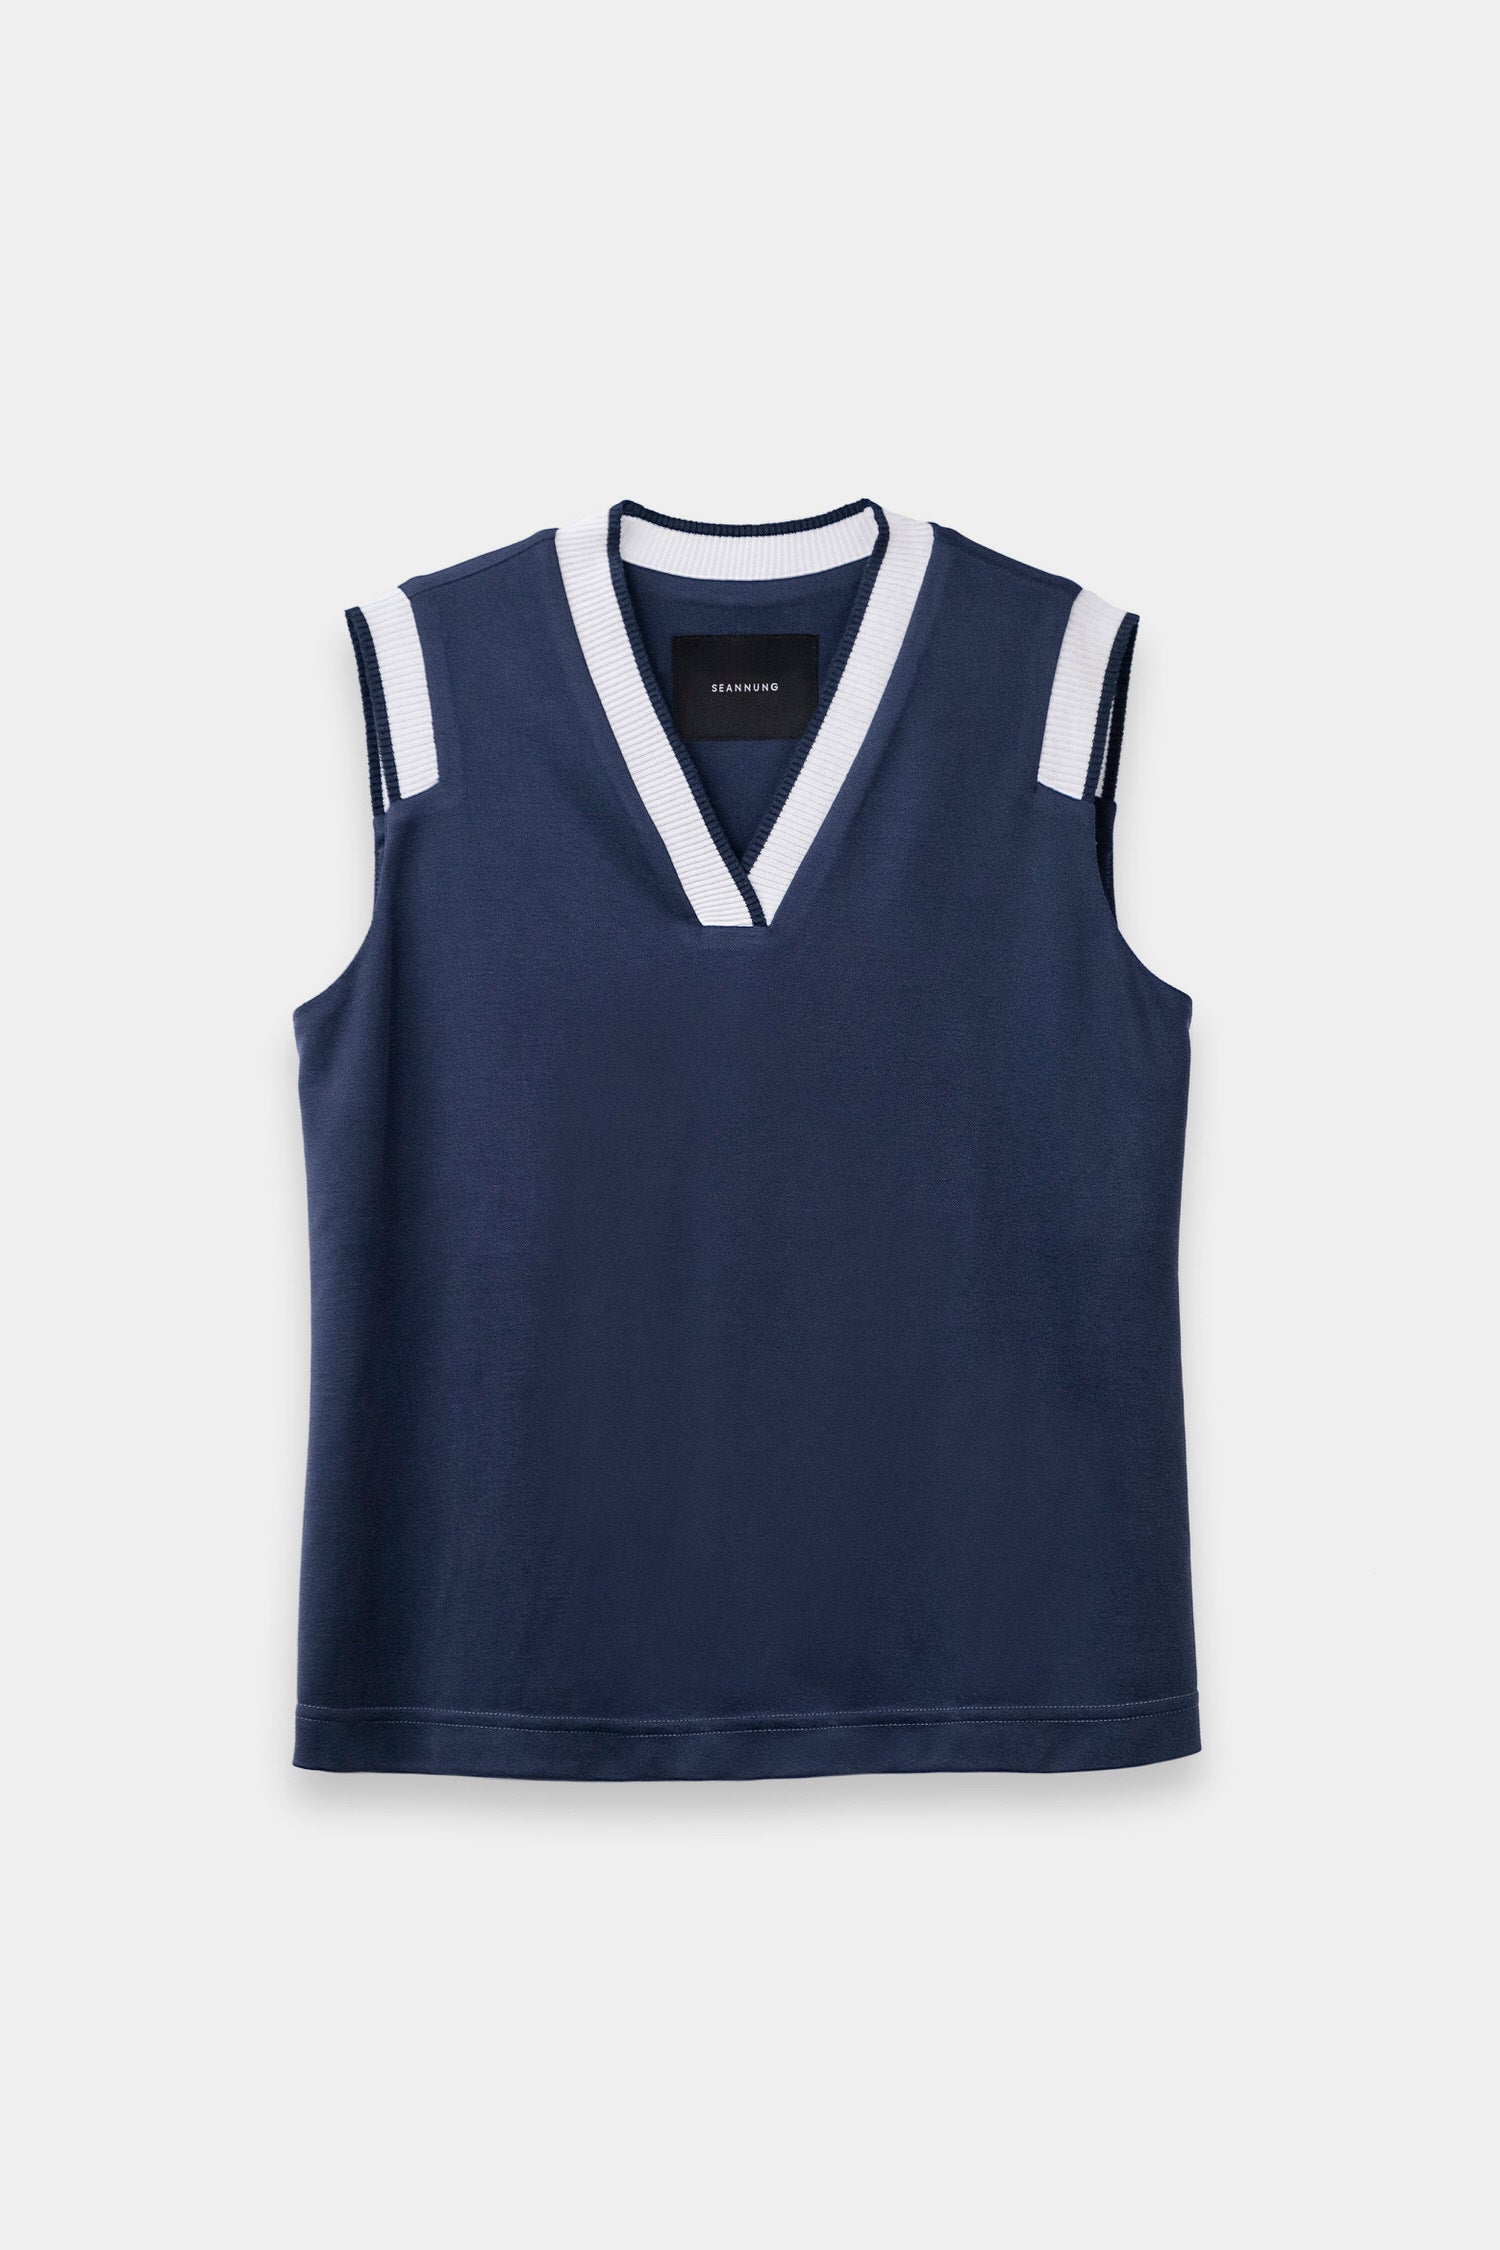 SEANNUNG - 深藍結構無袖POLO上衣 Structure Sleeveless Polo Shirt in Navy - Woman